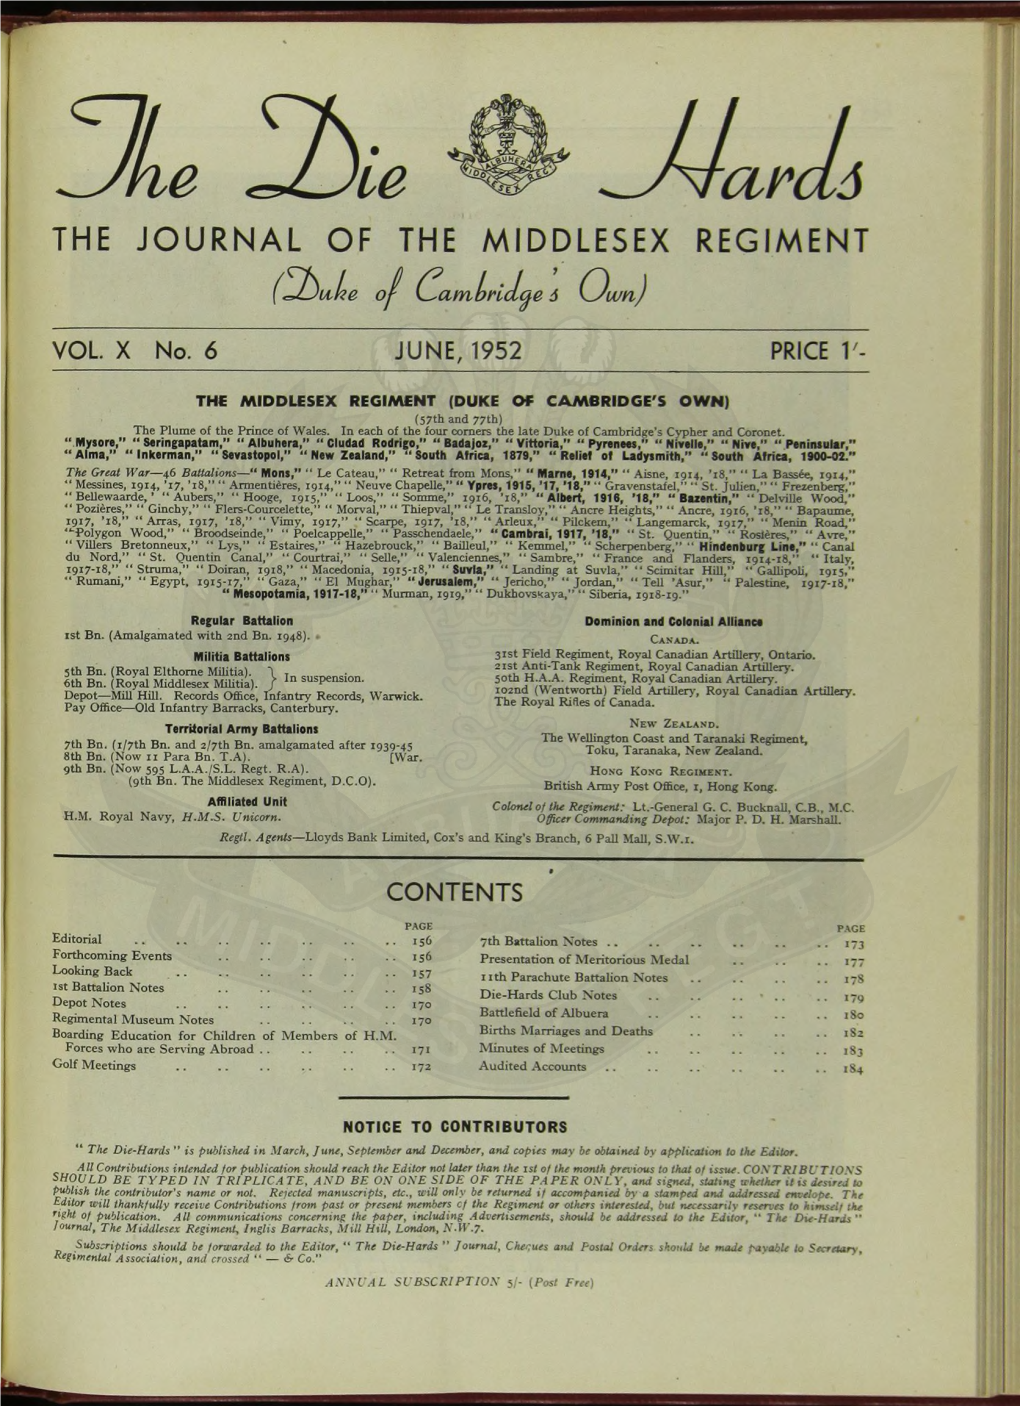 The Journal of the Middlesex Regiment